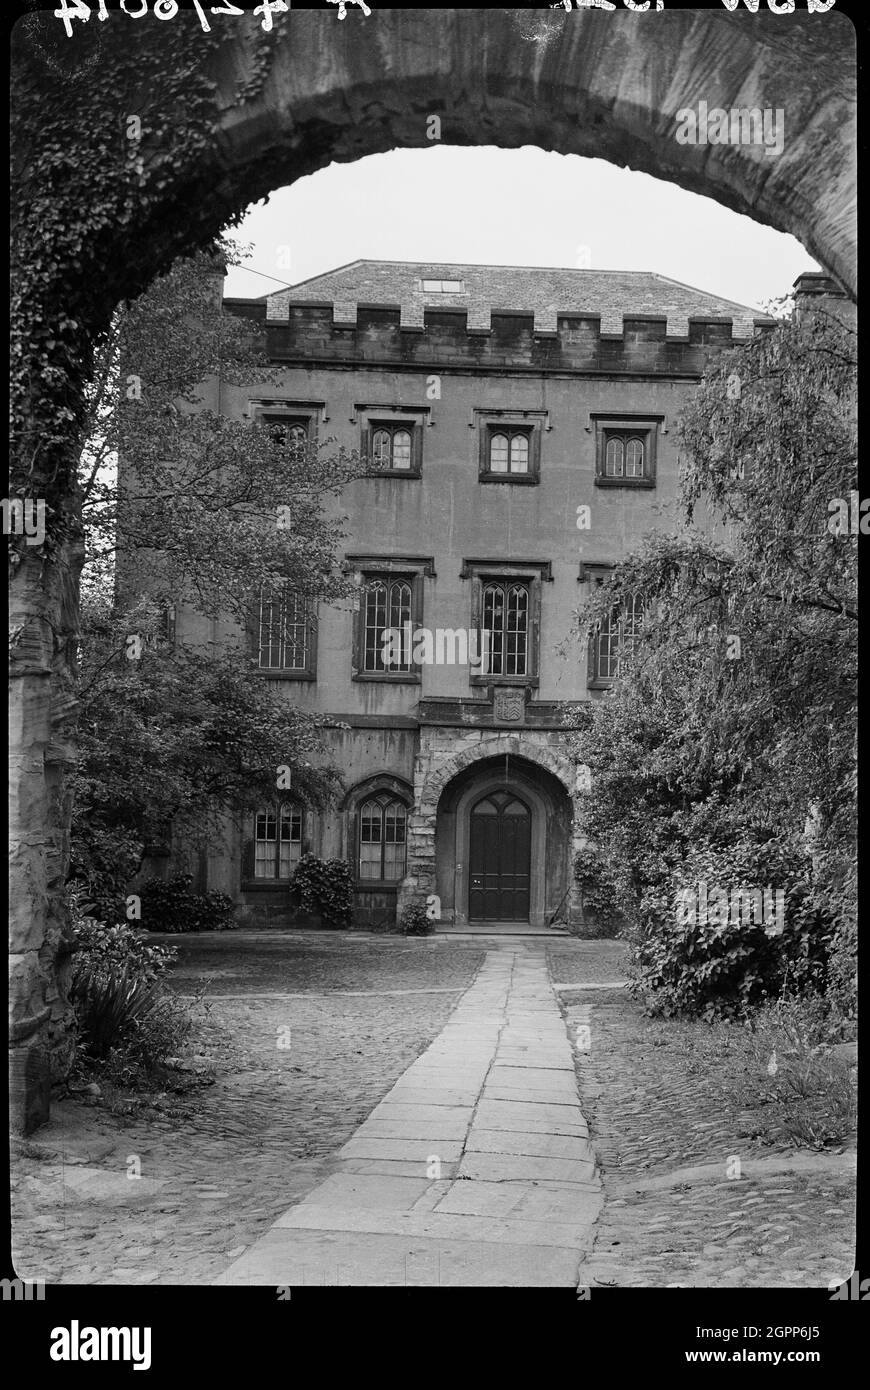 Wall with Archway in front of No. 9, The College, County Durham, 1942. An exterior view of St Mary's College, now known as the Chorister School, seen from the north through an archway. The former prebendal house, now a school, has medieval fabric with alterations made in the 17th and 18th centuries. The main house has three storeys and five windows with towers at each corner. The parapet is embattled. At the rear of the building is the short arm of the L-shaped plan. The arch in the foreground is part of a garden wall with medieval, 17th and 18th century material. The wall may have formerly be Stock Photo